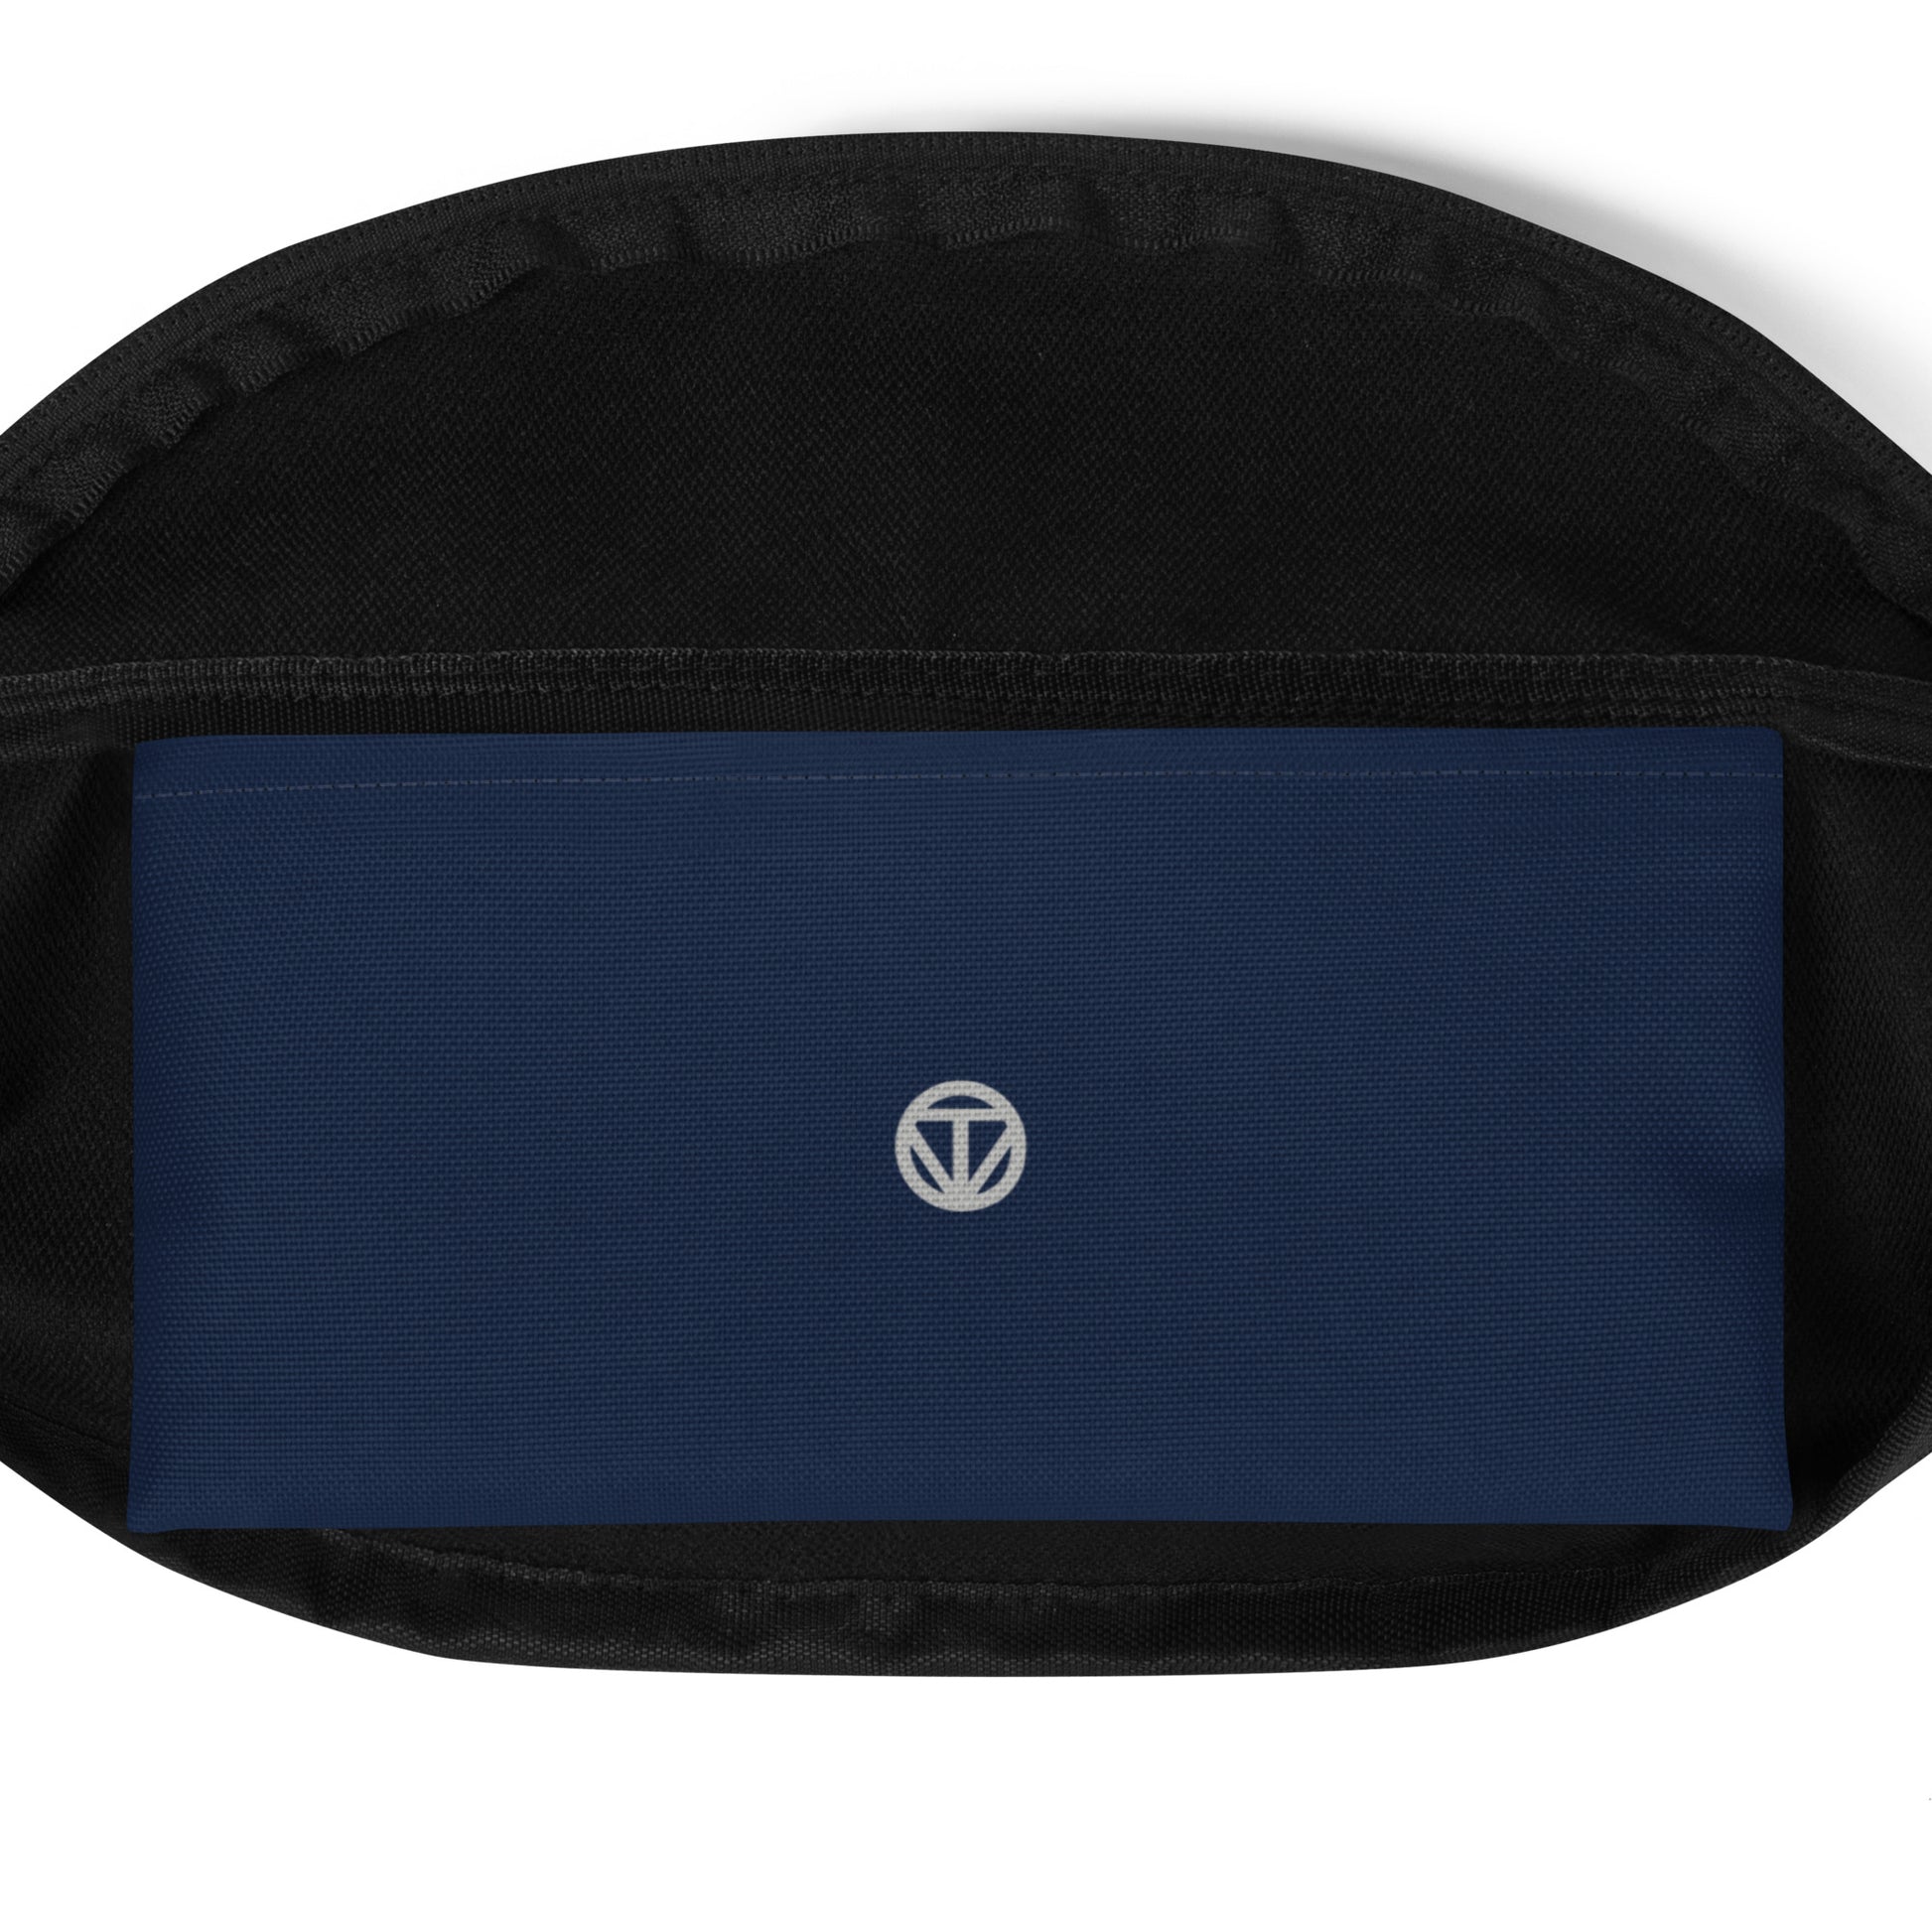 TIME OF VIBES - Fanny Pack WAVES - €39.00